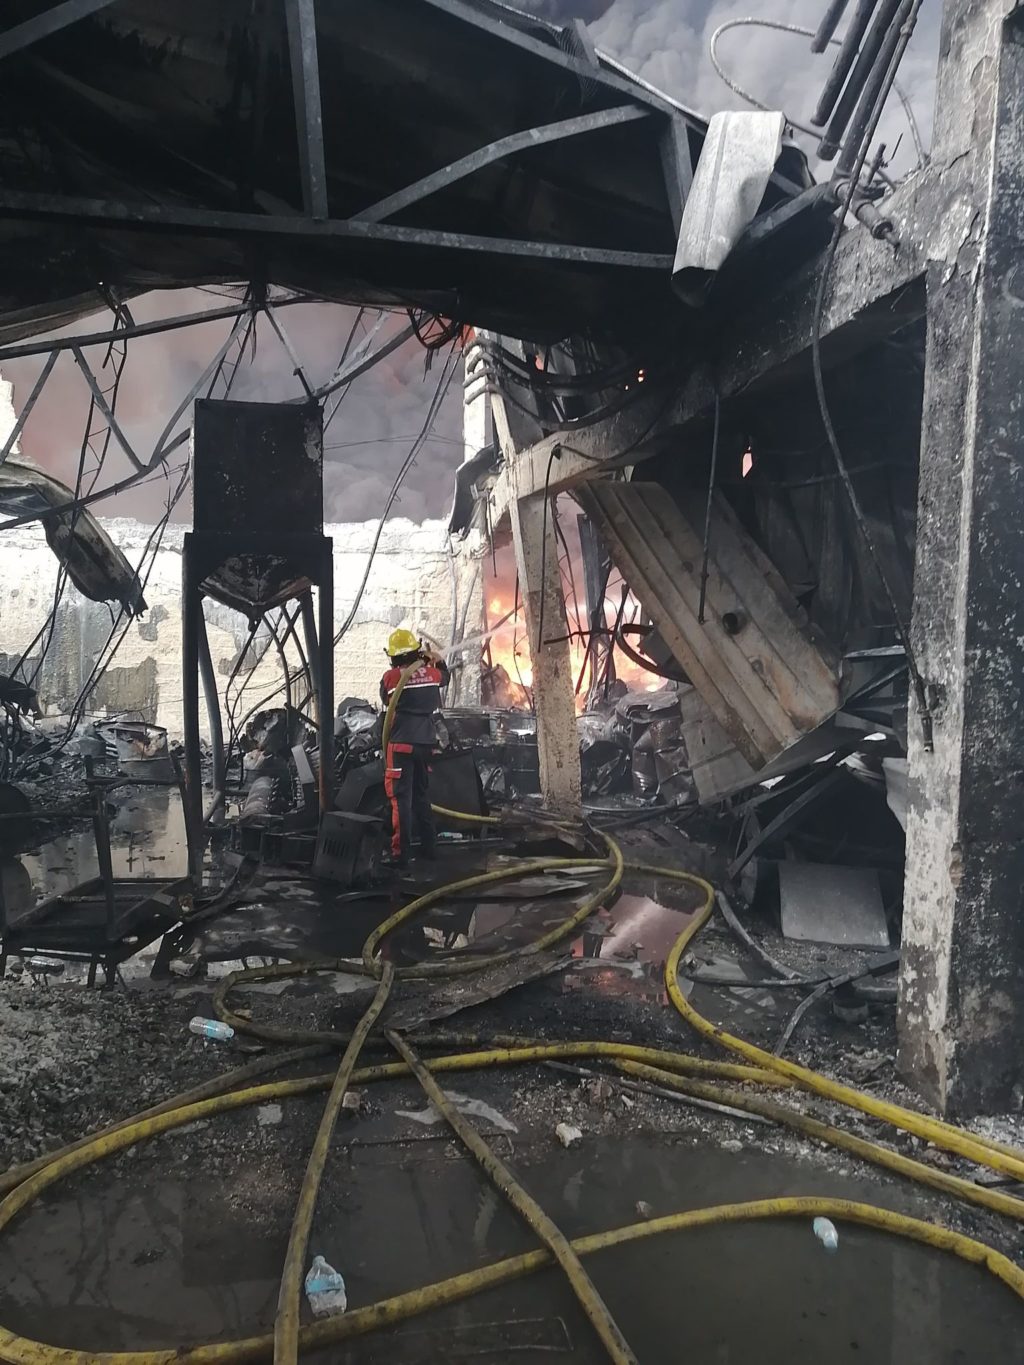 A firefighter continues to put out the fire in a paint warehouse in Barangay Cabancalan, Mandaue City on February 11, 2021. | Contributed photo